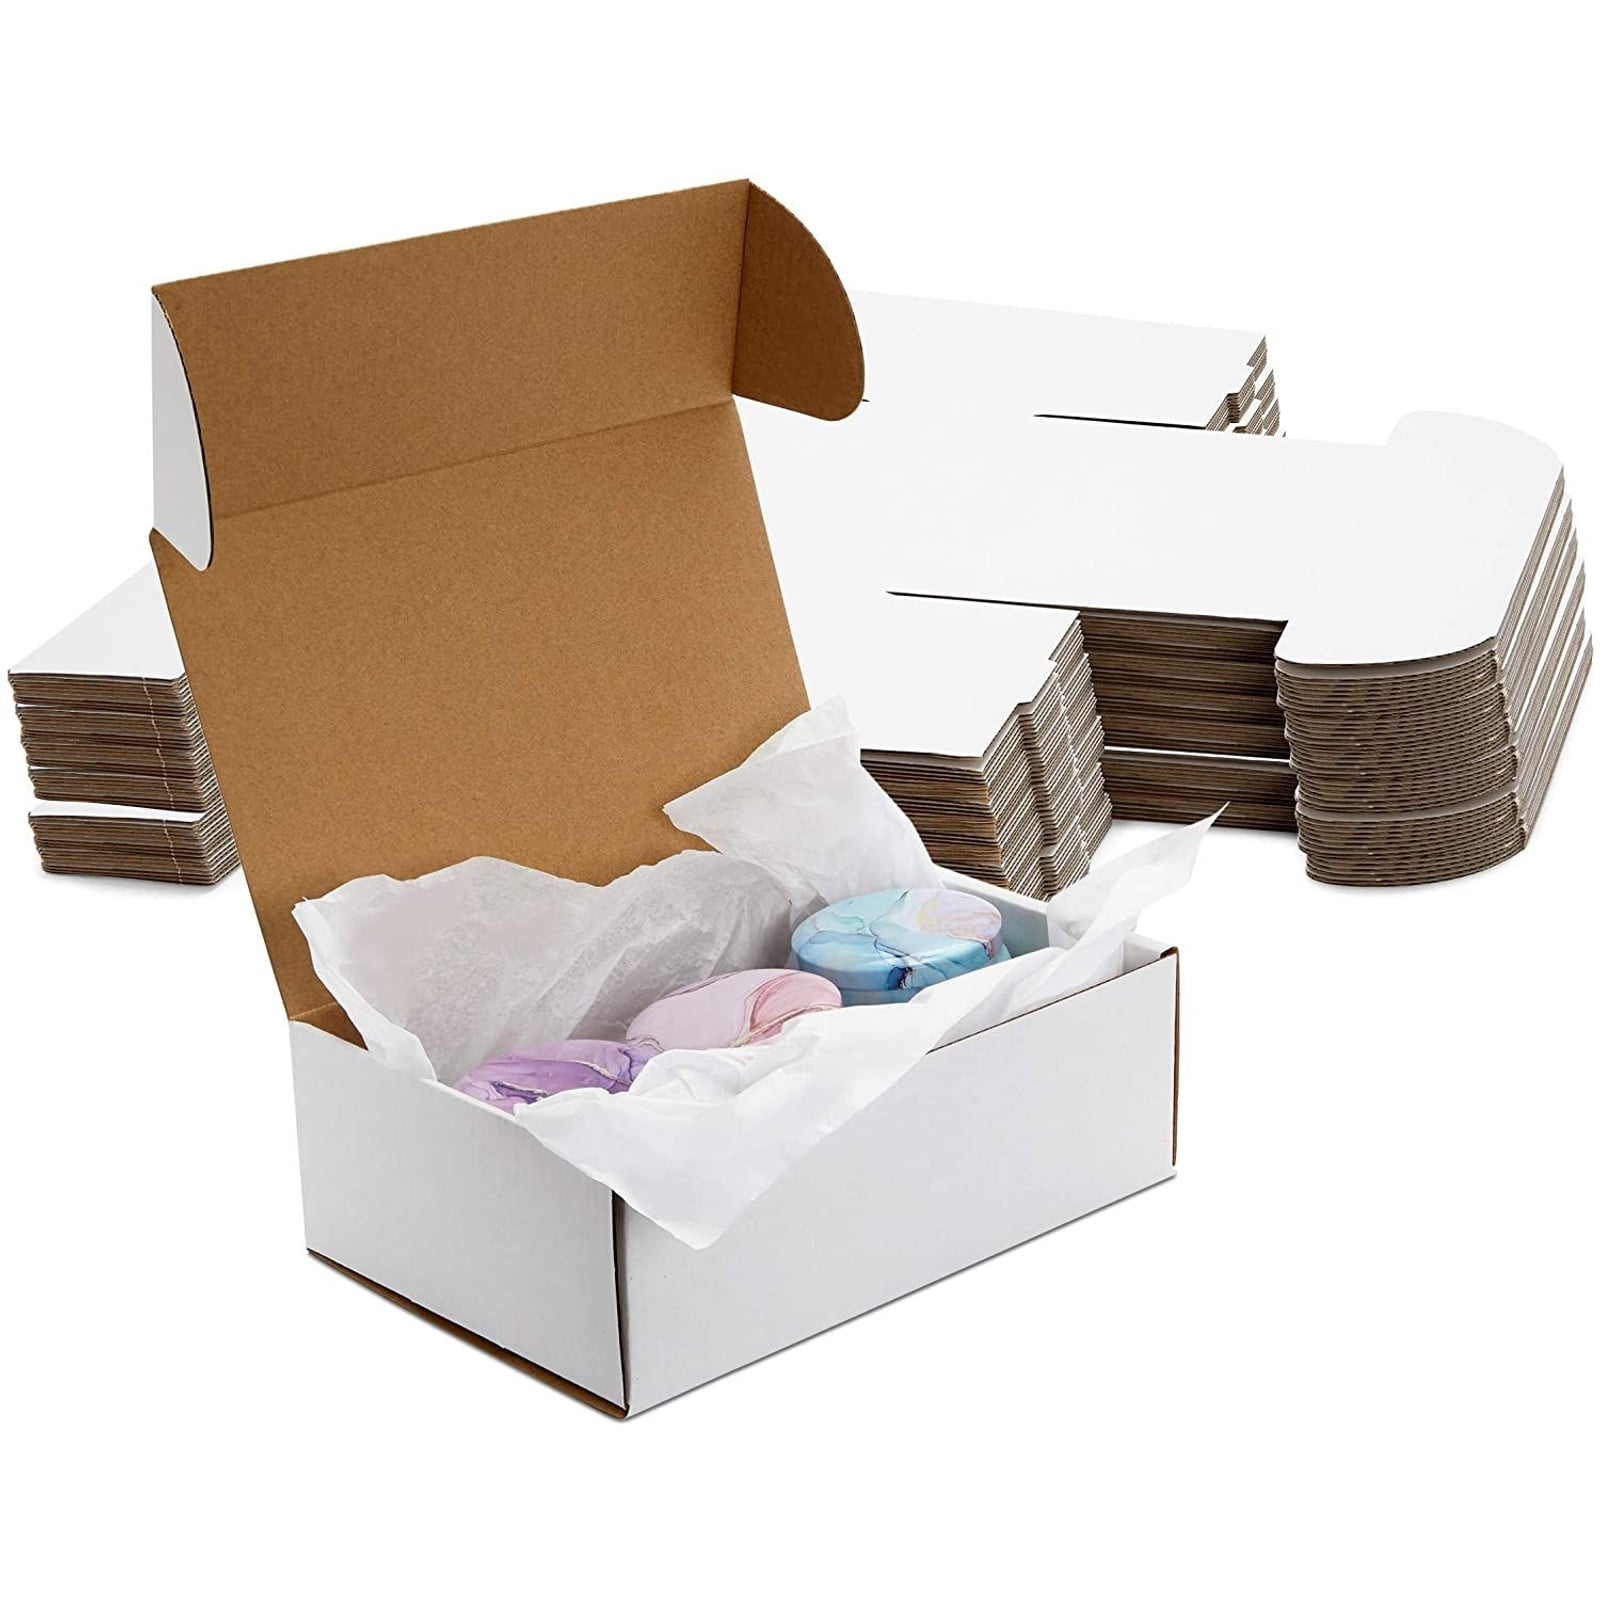 4 x 3 x 3" Corrugated Shipping Mailers from The Boxery 50/pk 